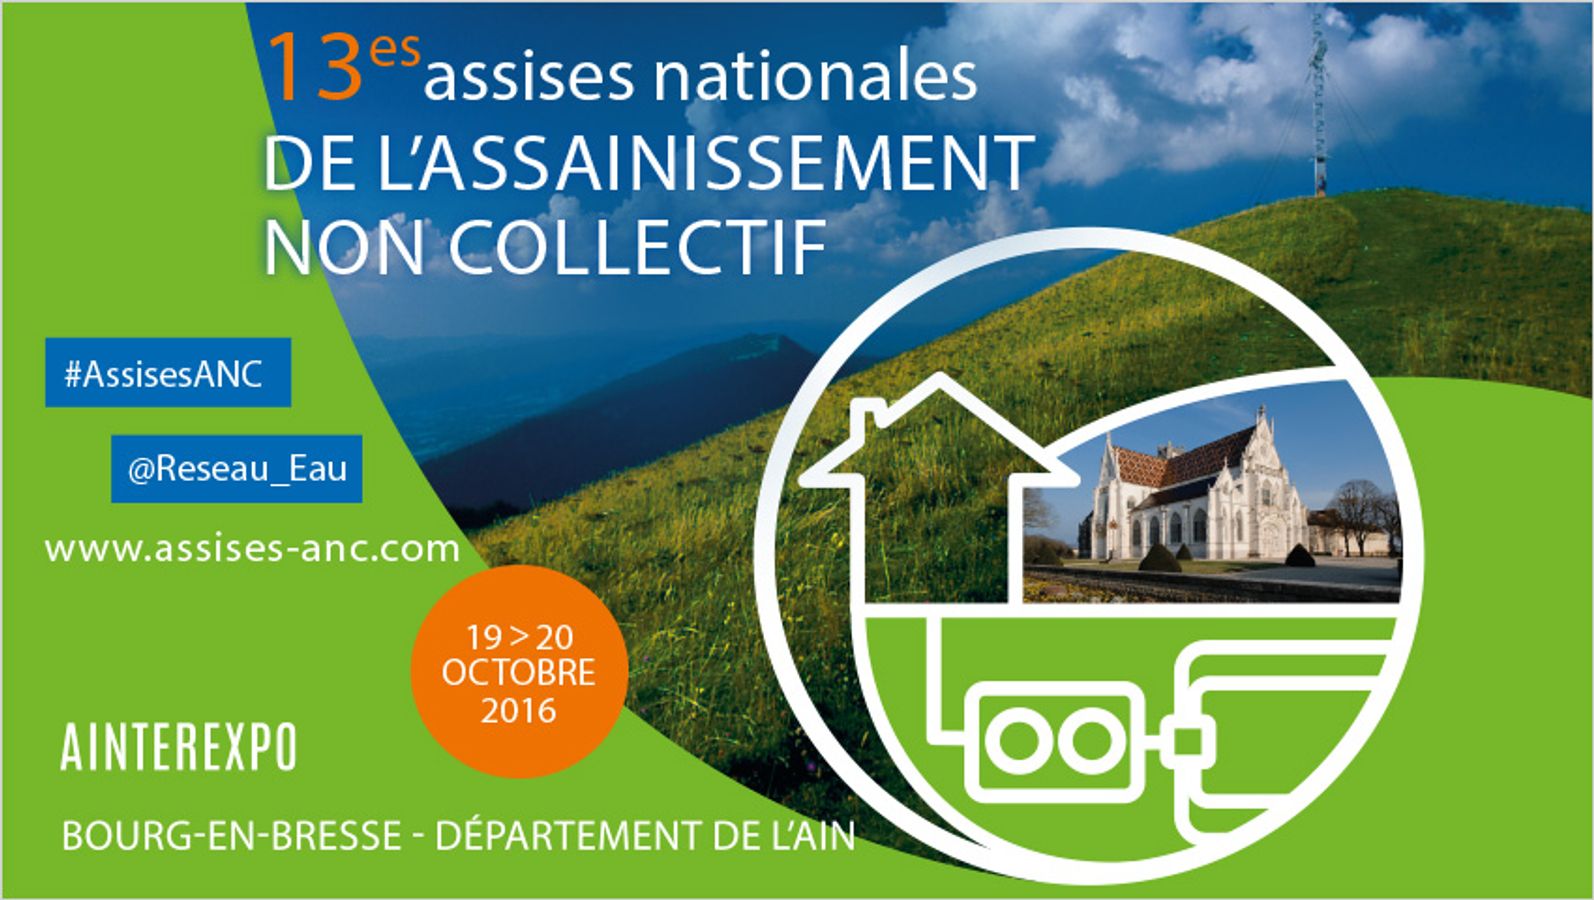 Assises ANC - Supports disponibles - Jour 1